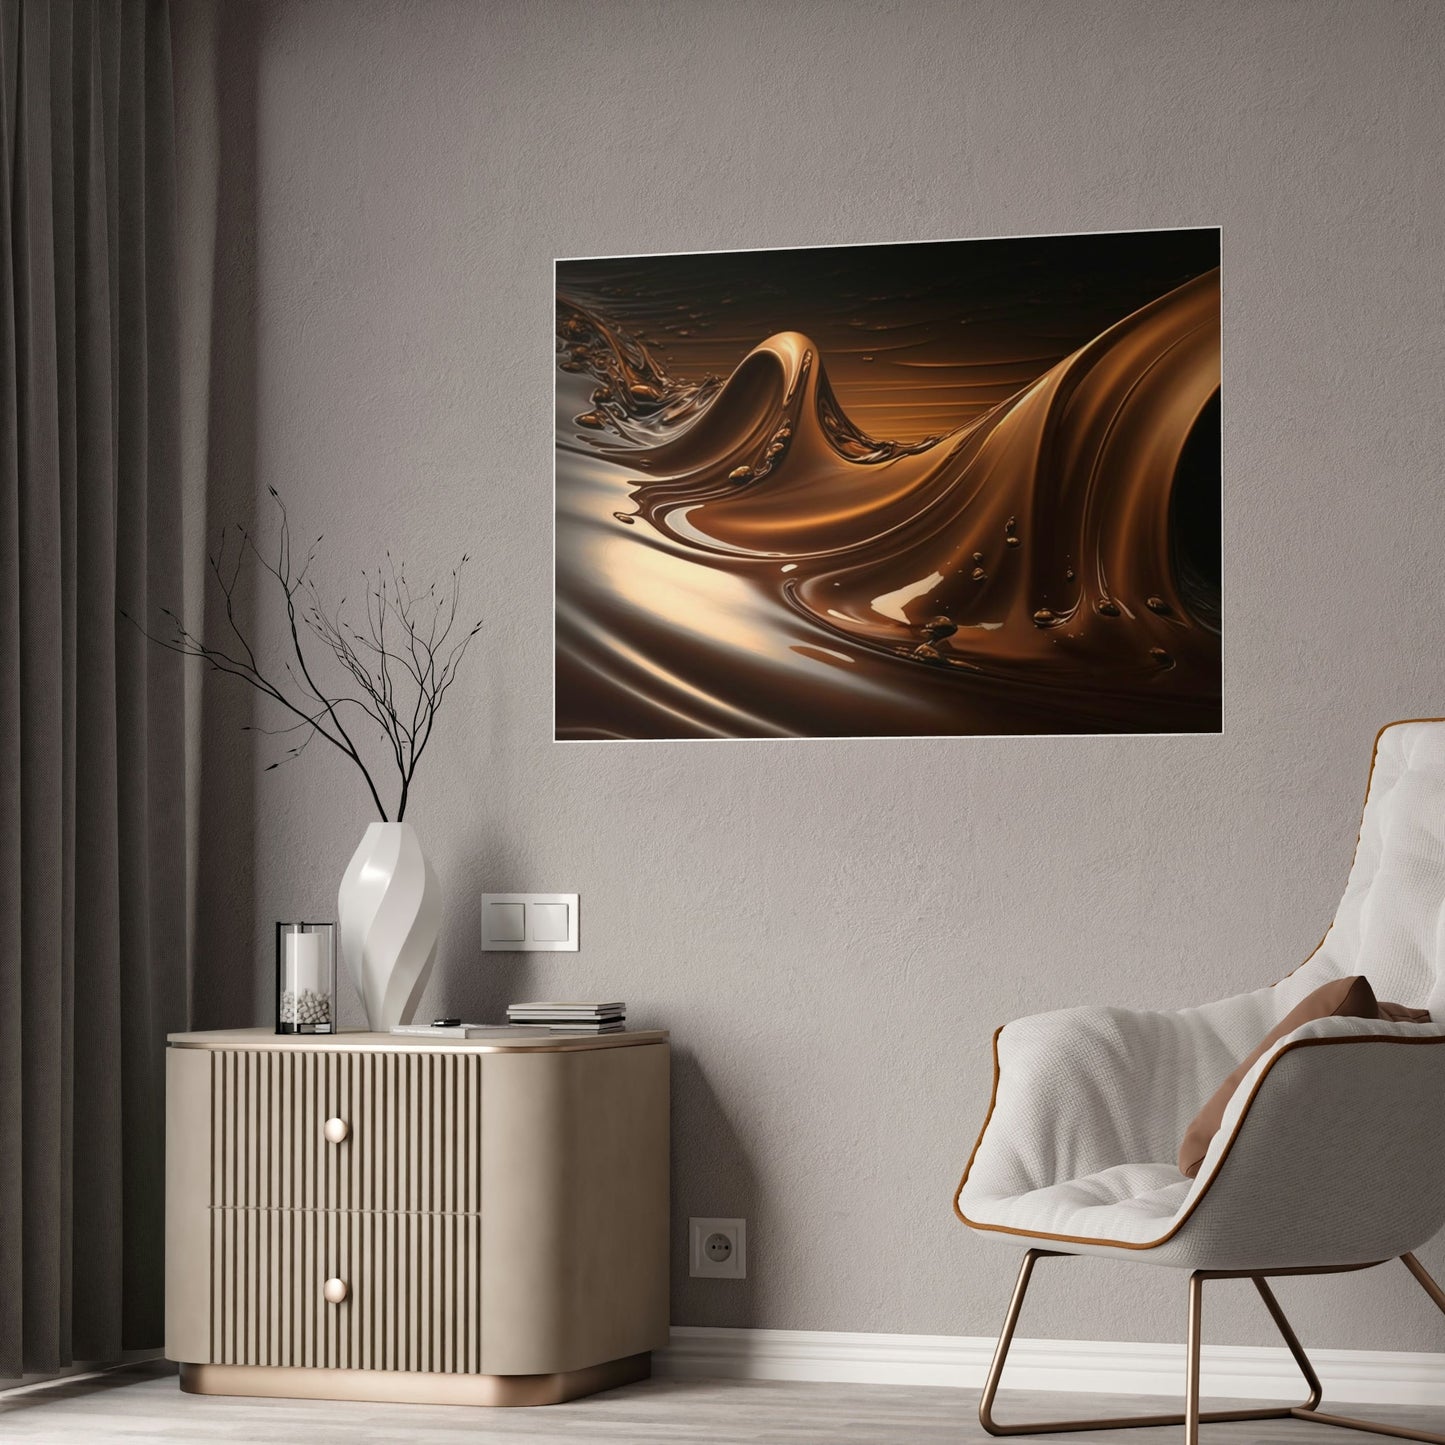 Chocolate Delight: Delicious Brown Canvas Print to Hang in Your Kitchen